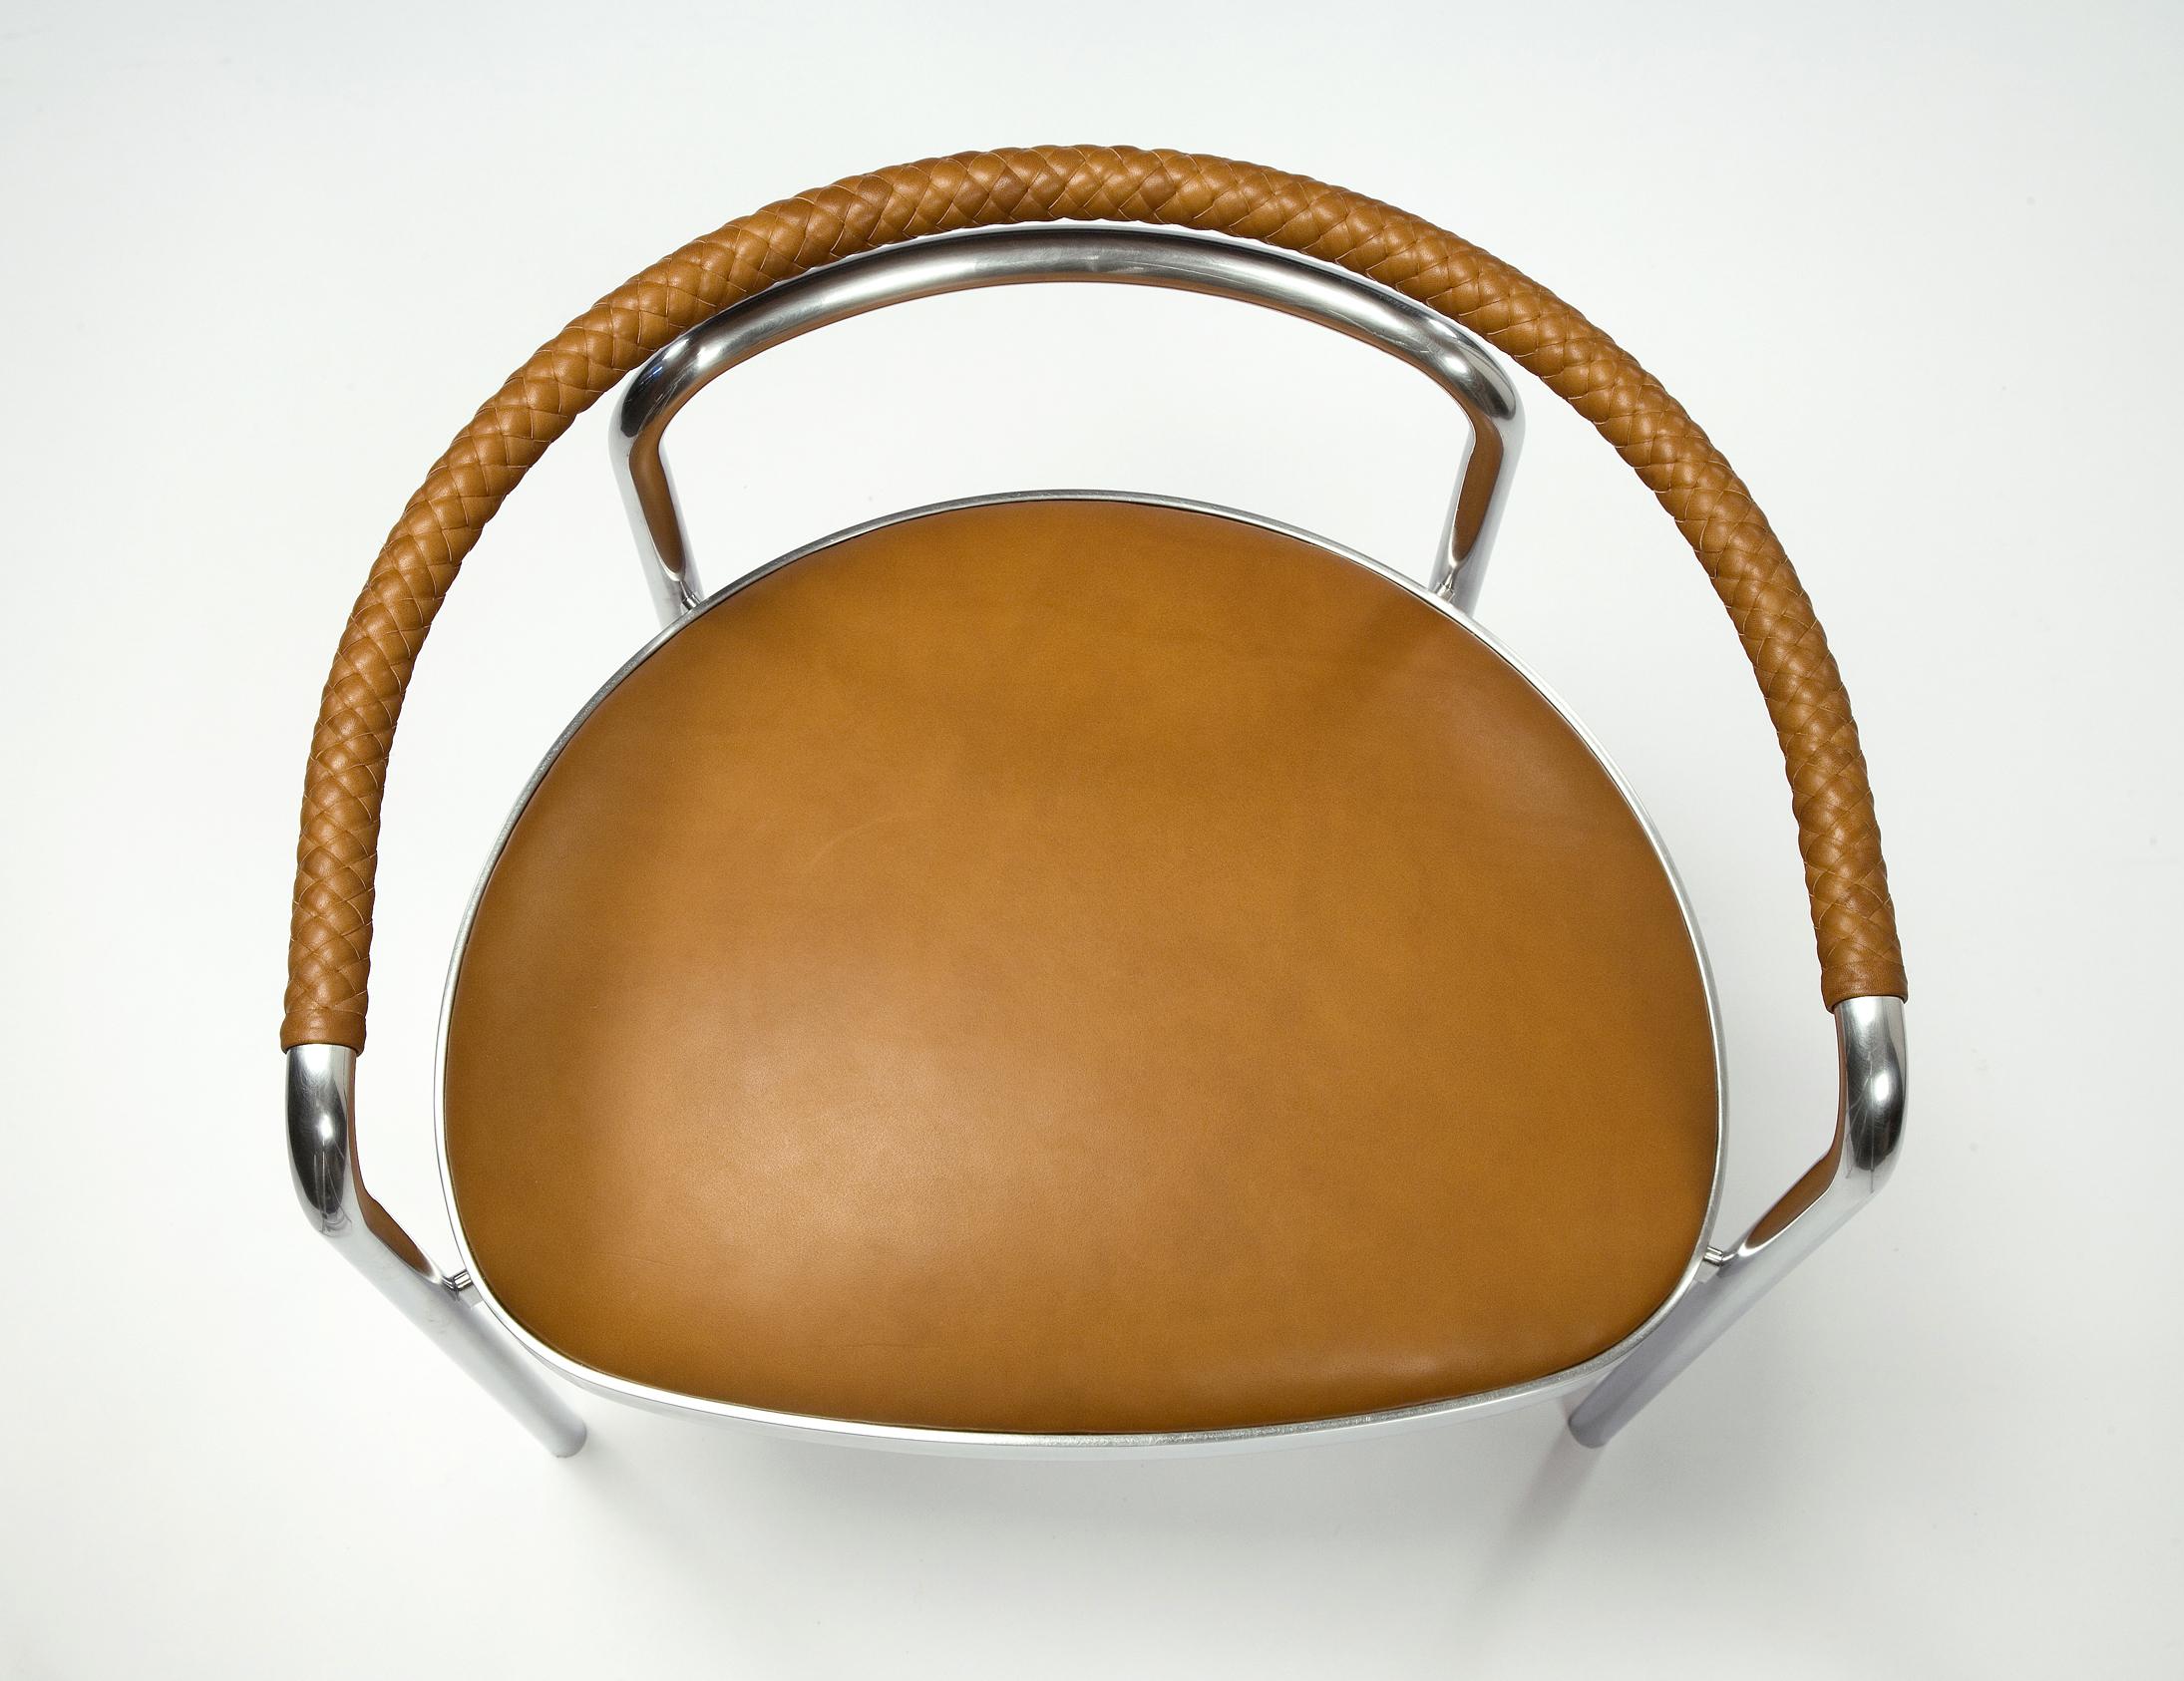 PK 12 Chair in Braided Brown Leather and Stainless Steel by Poul Kjaerholm, 1964 For Sale 4